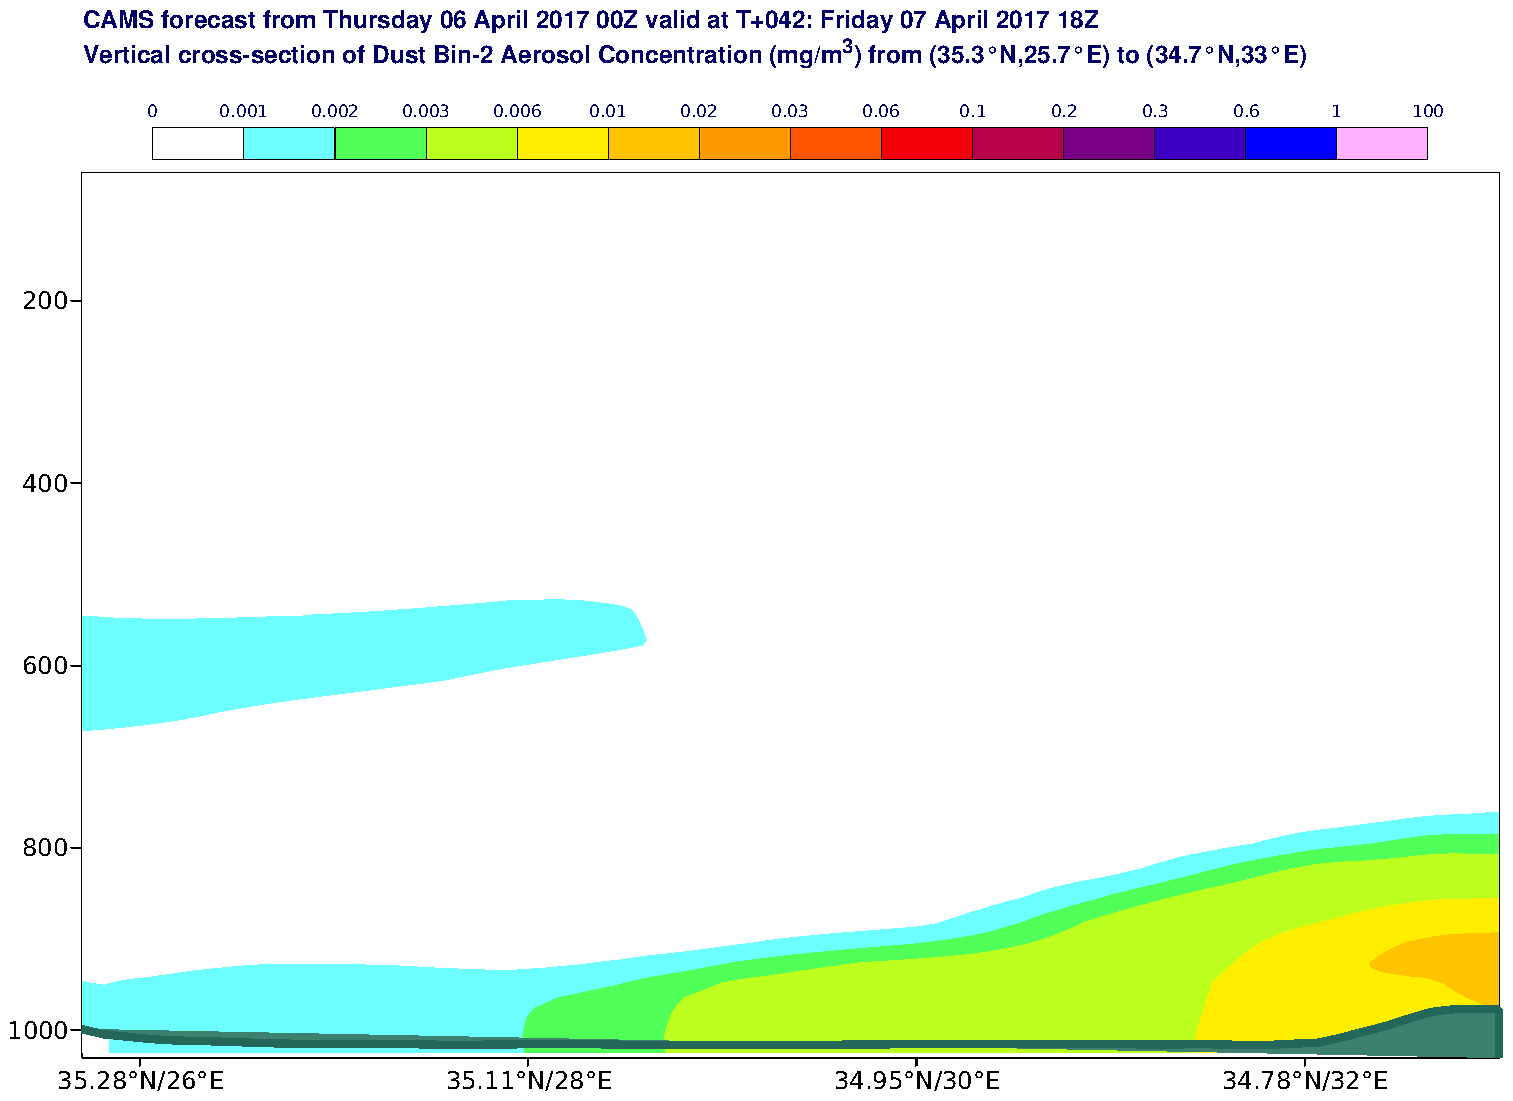 Vertical cross-section of Dust Bin-2 Aerosol Concentration (mg/m3) valid at T42 - 2017-04-07 18:00